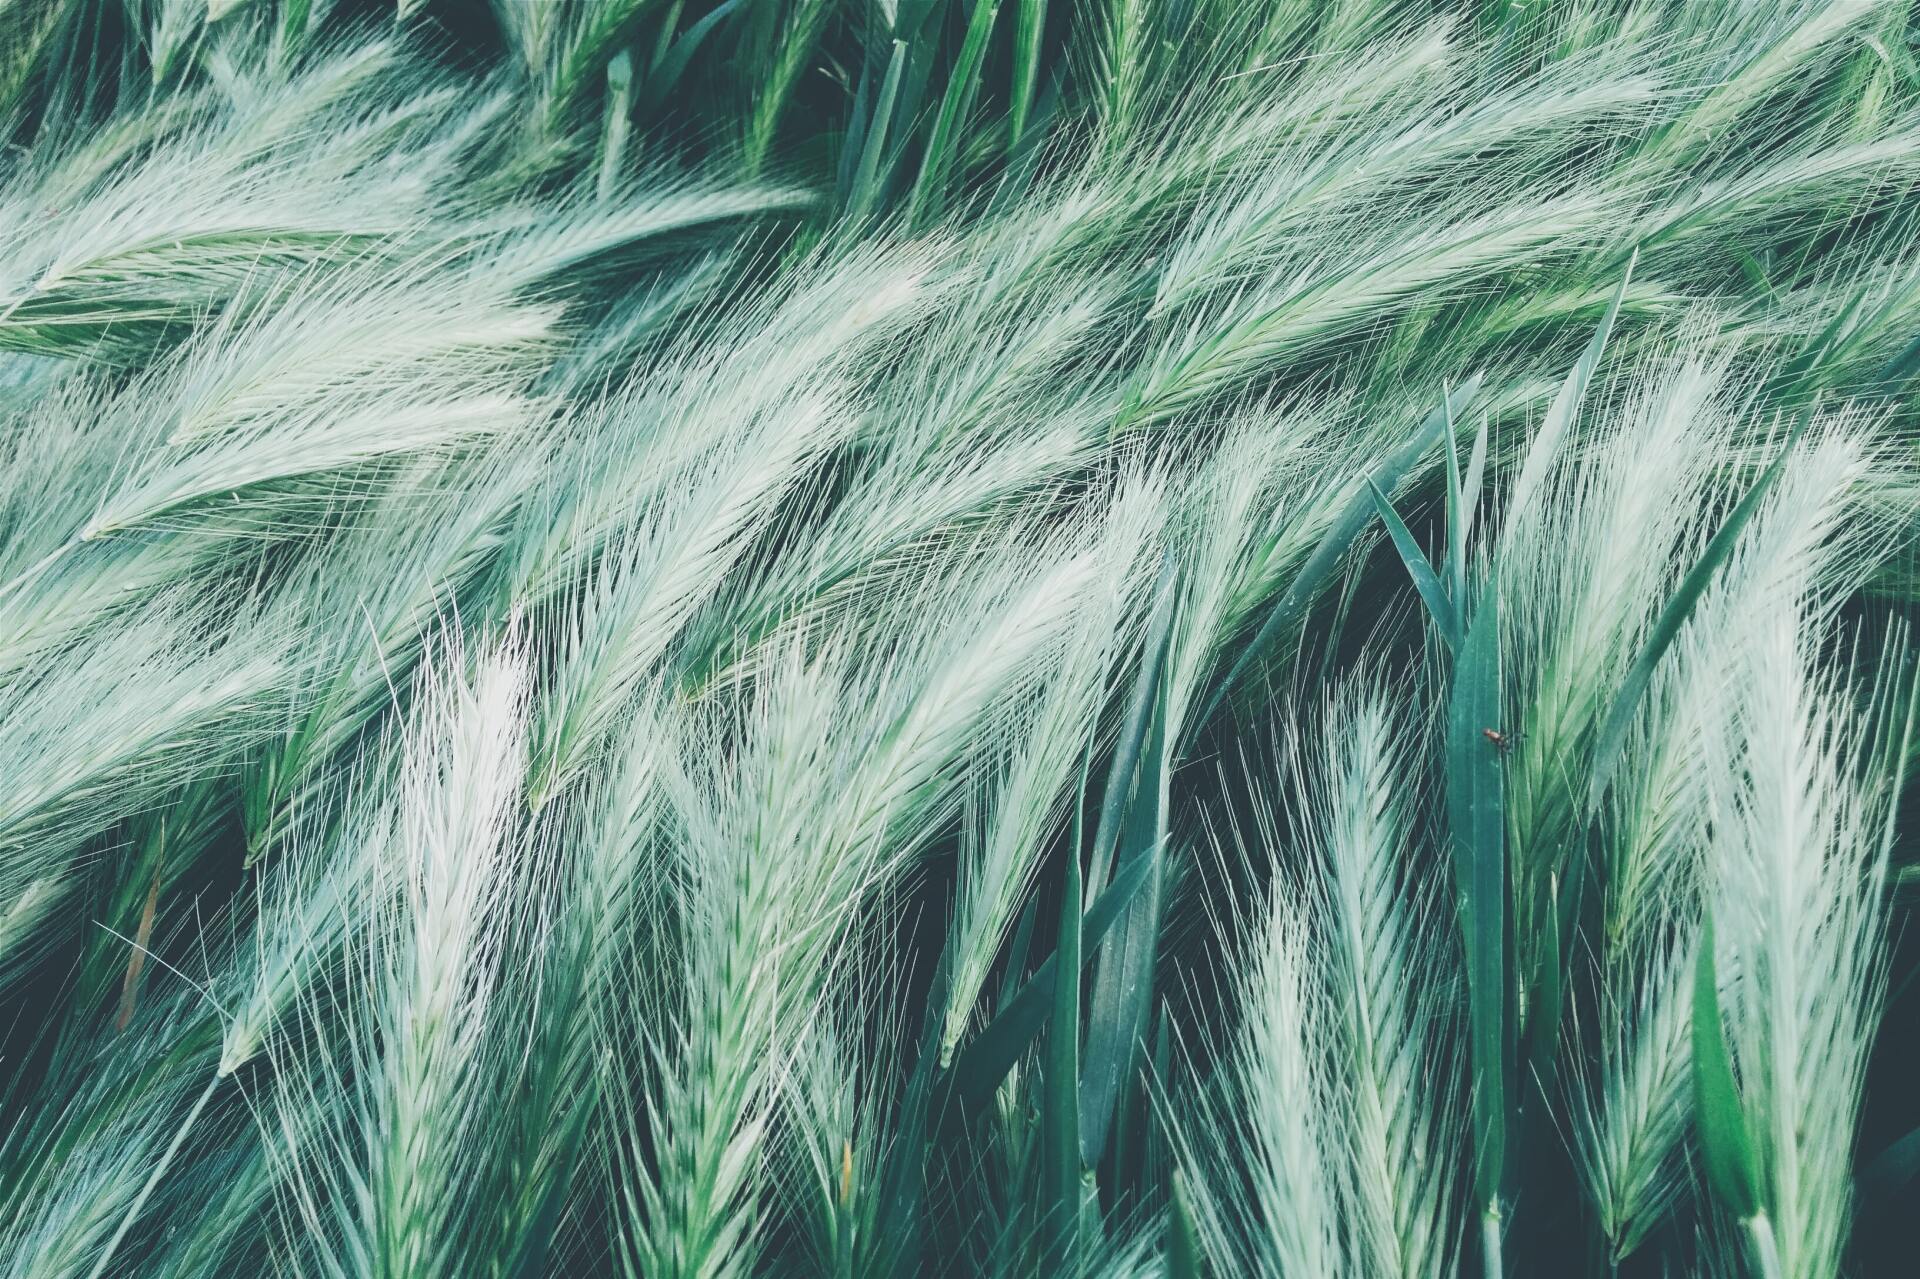 A close up image of green wheat growing in a field